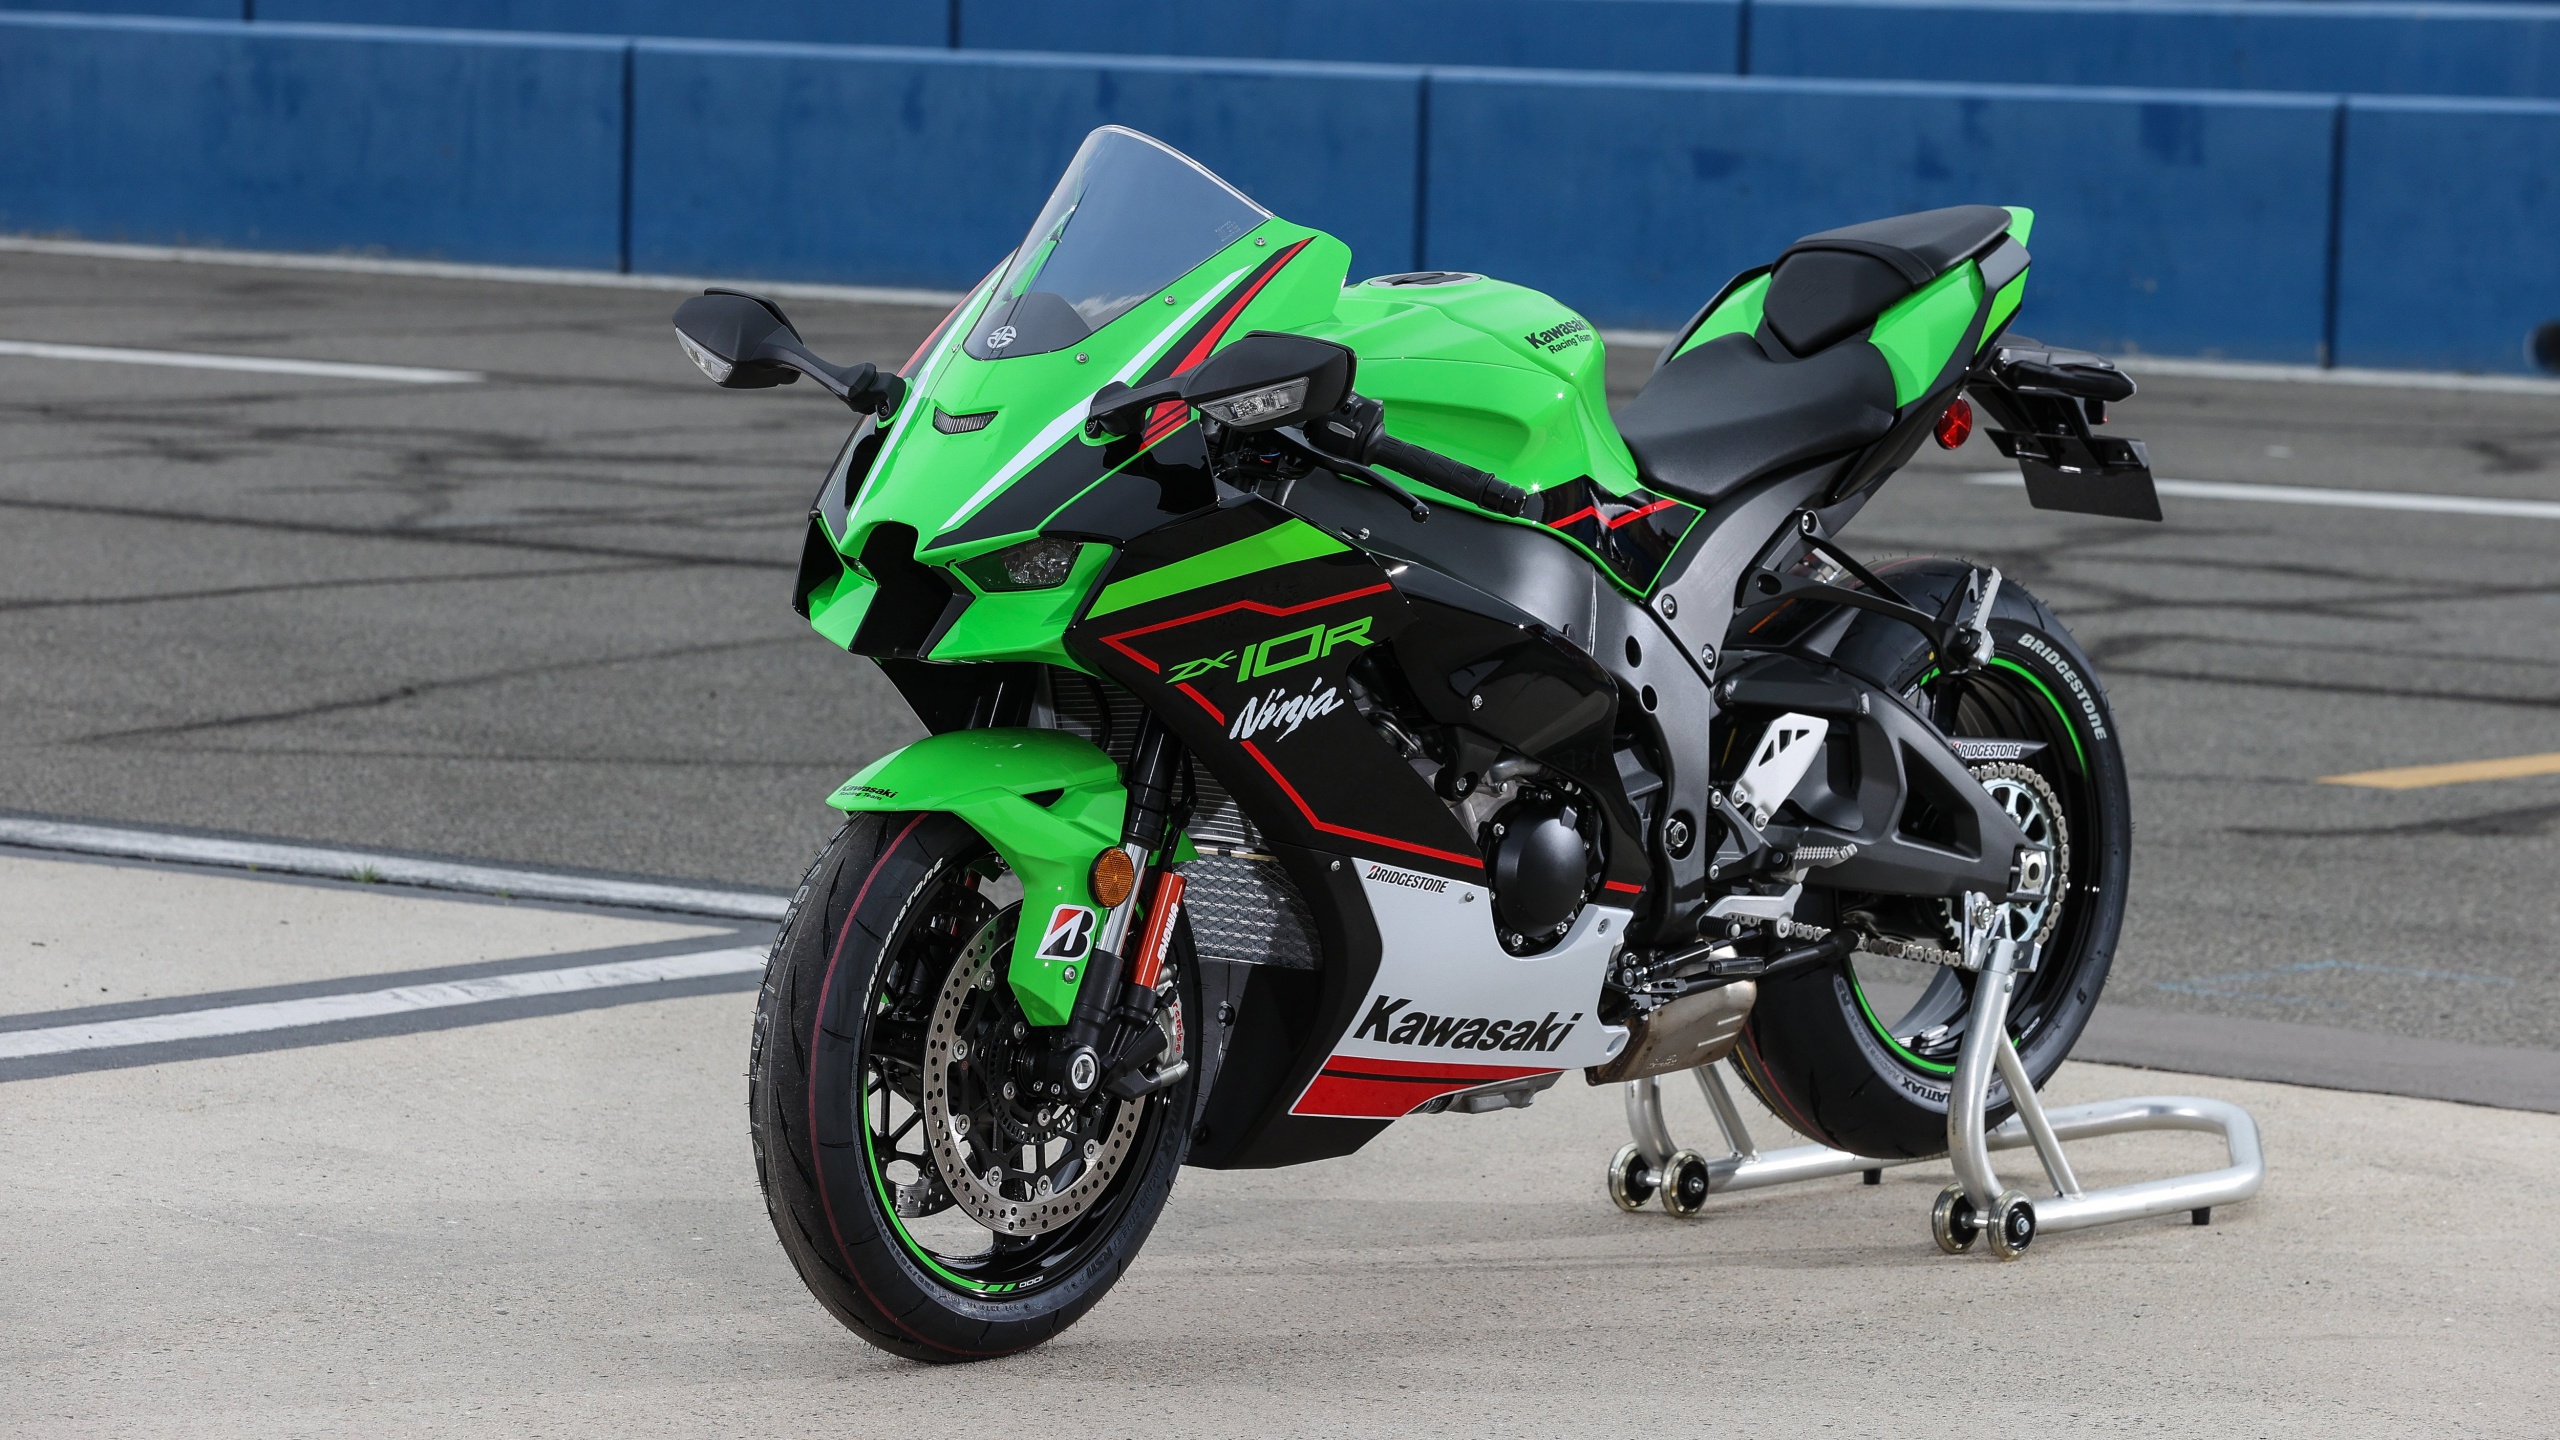 25 Outstanding 4k wallpaper zx10r You Can Use It For Free Aesthetic Arena